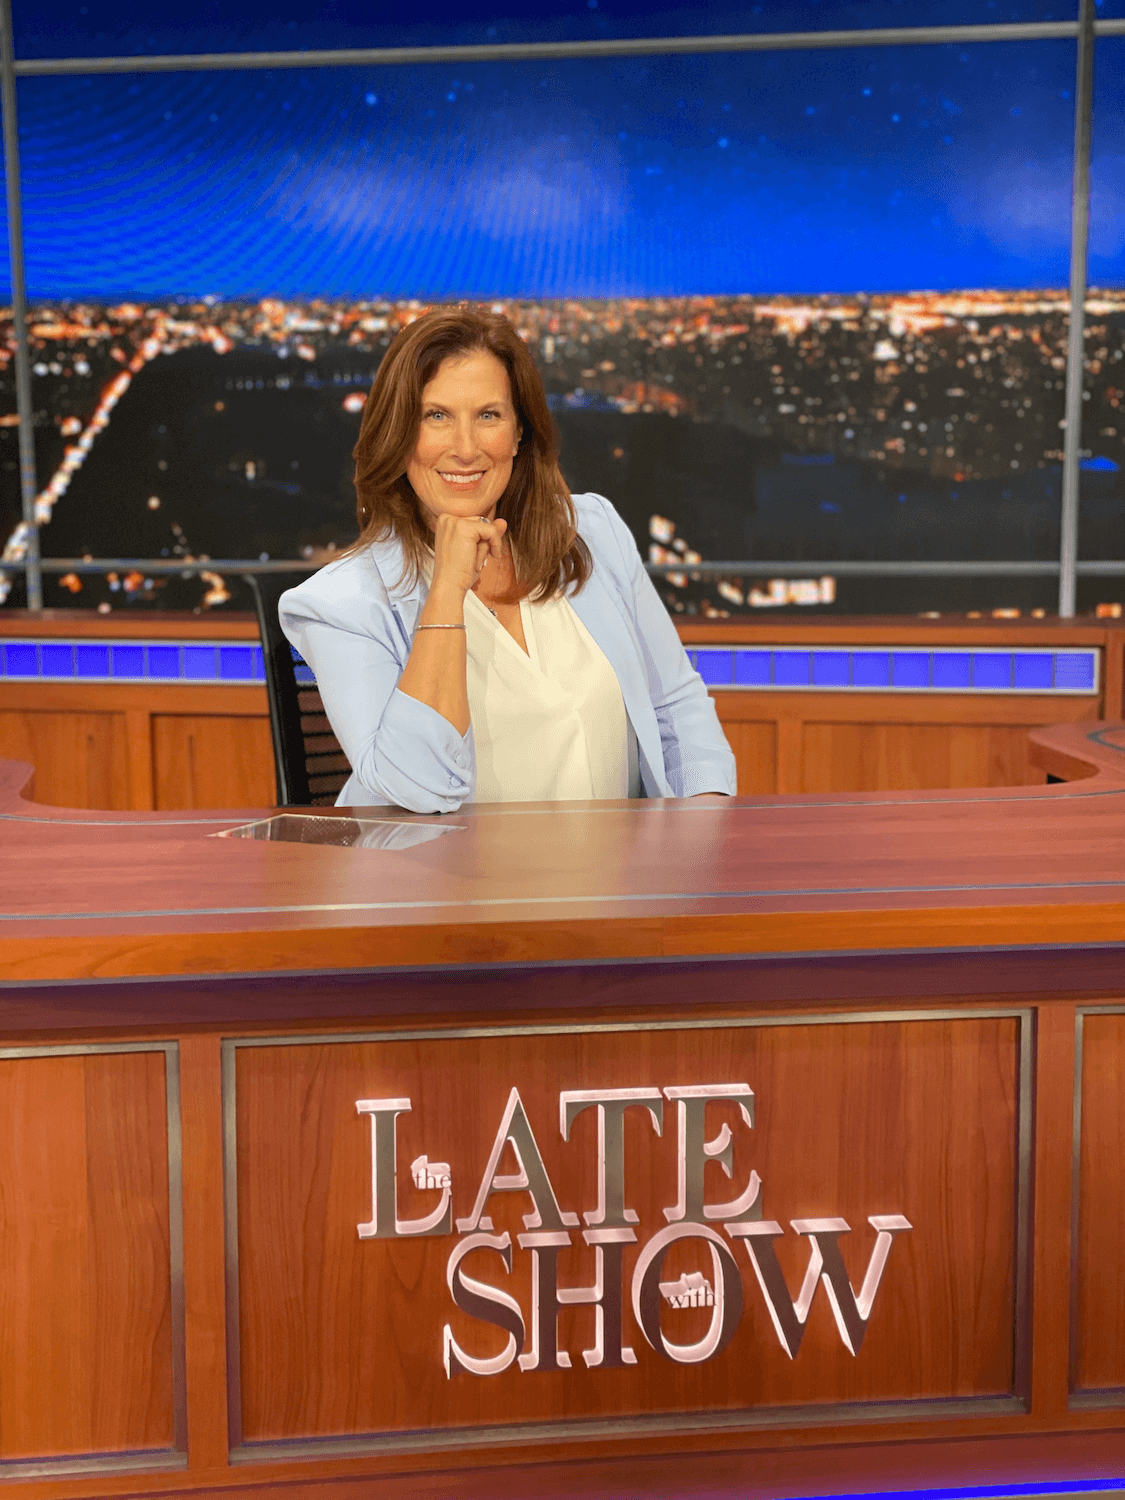 Beth Korn- Coach on Late Show.png